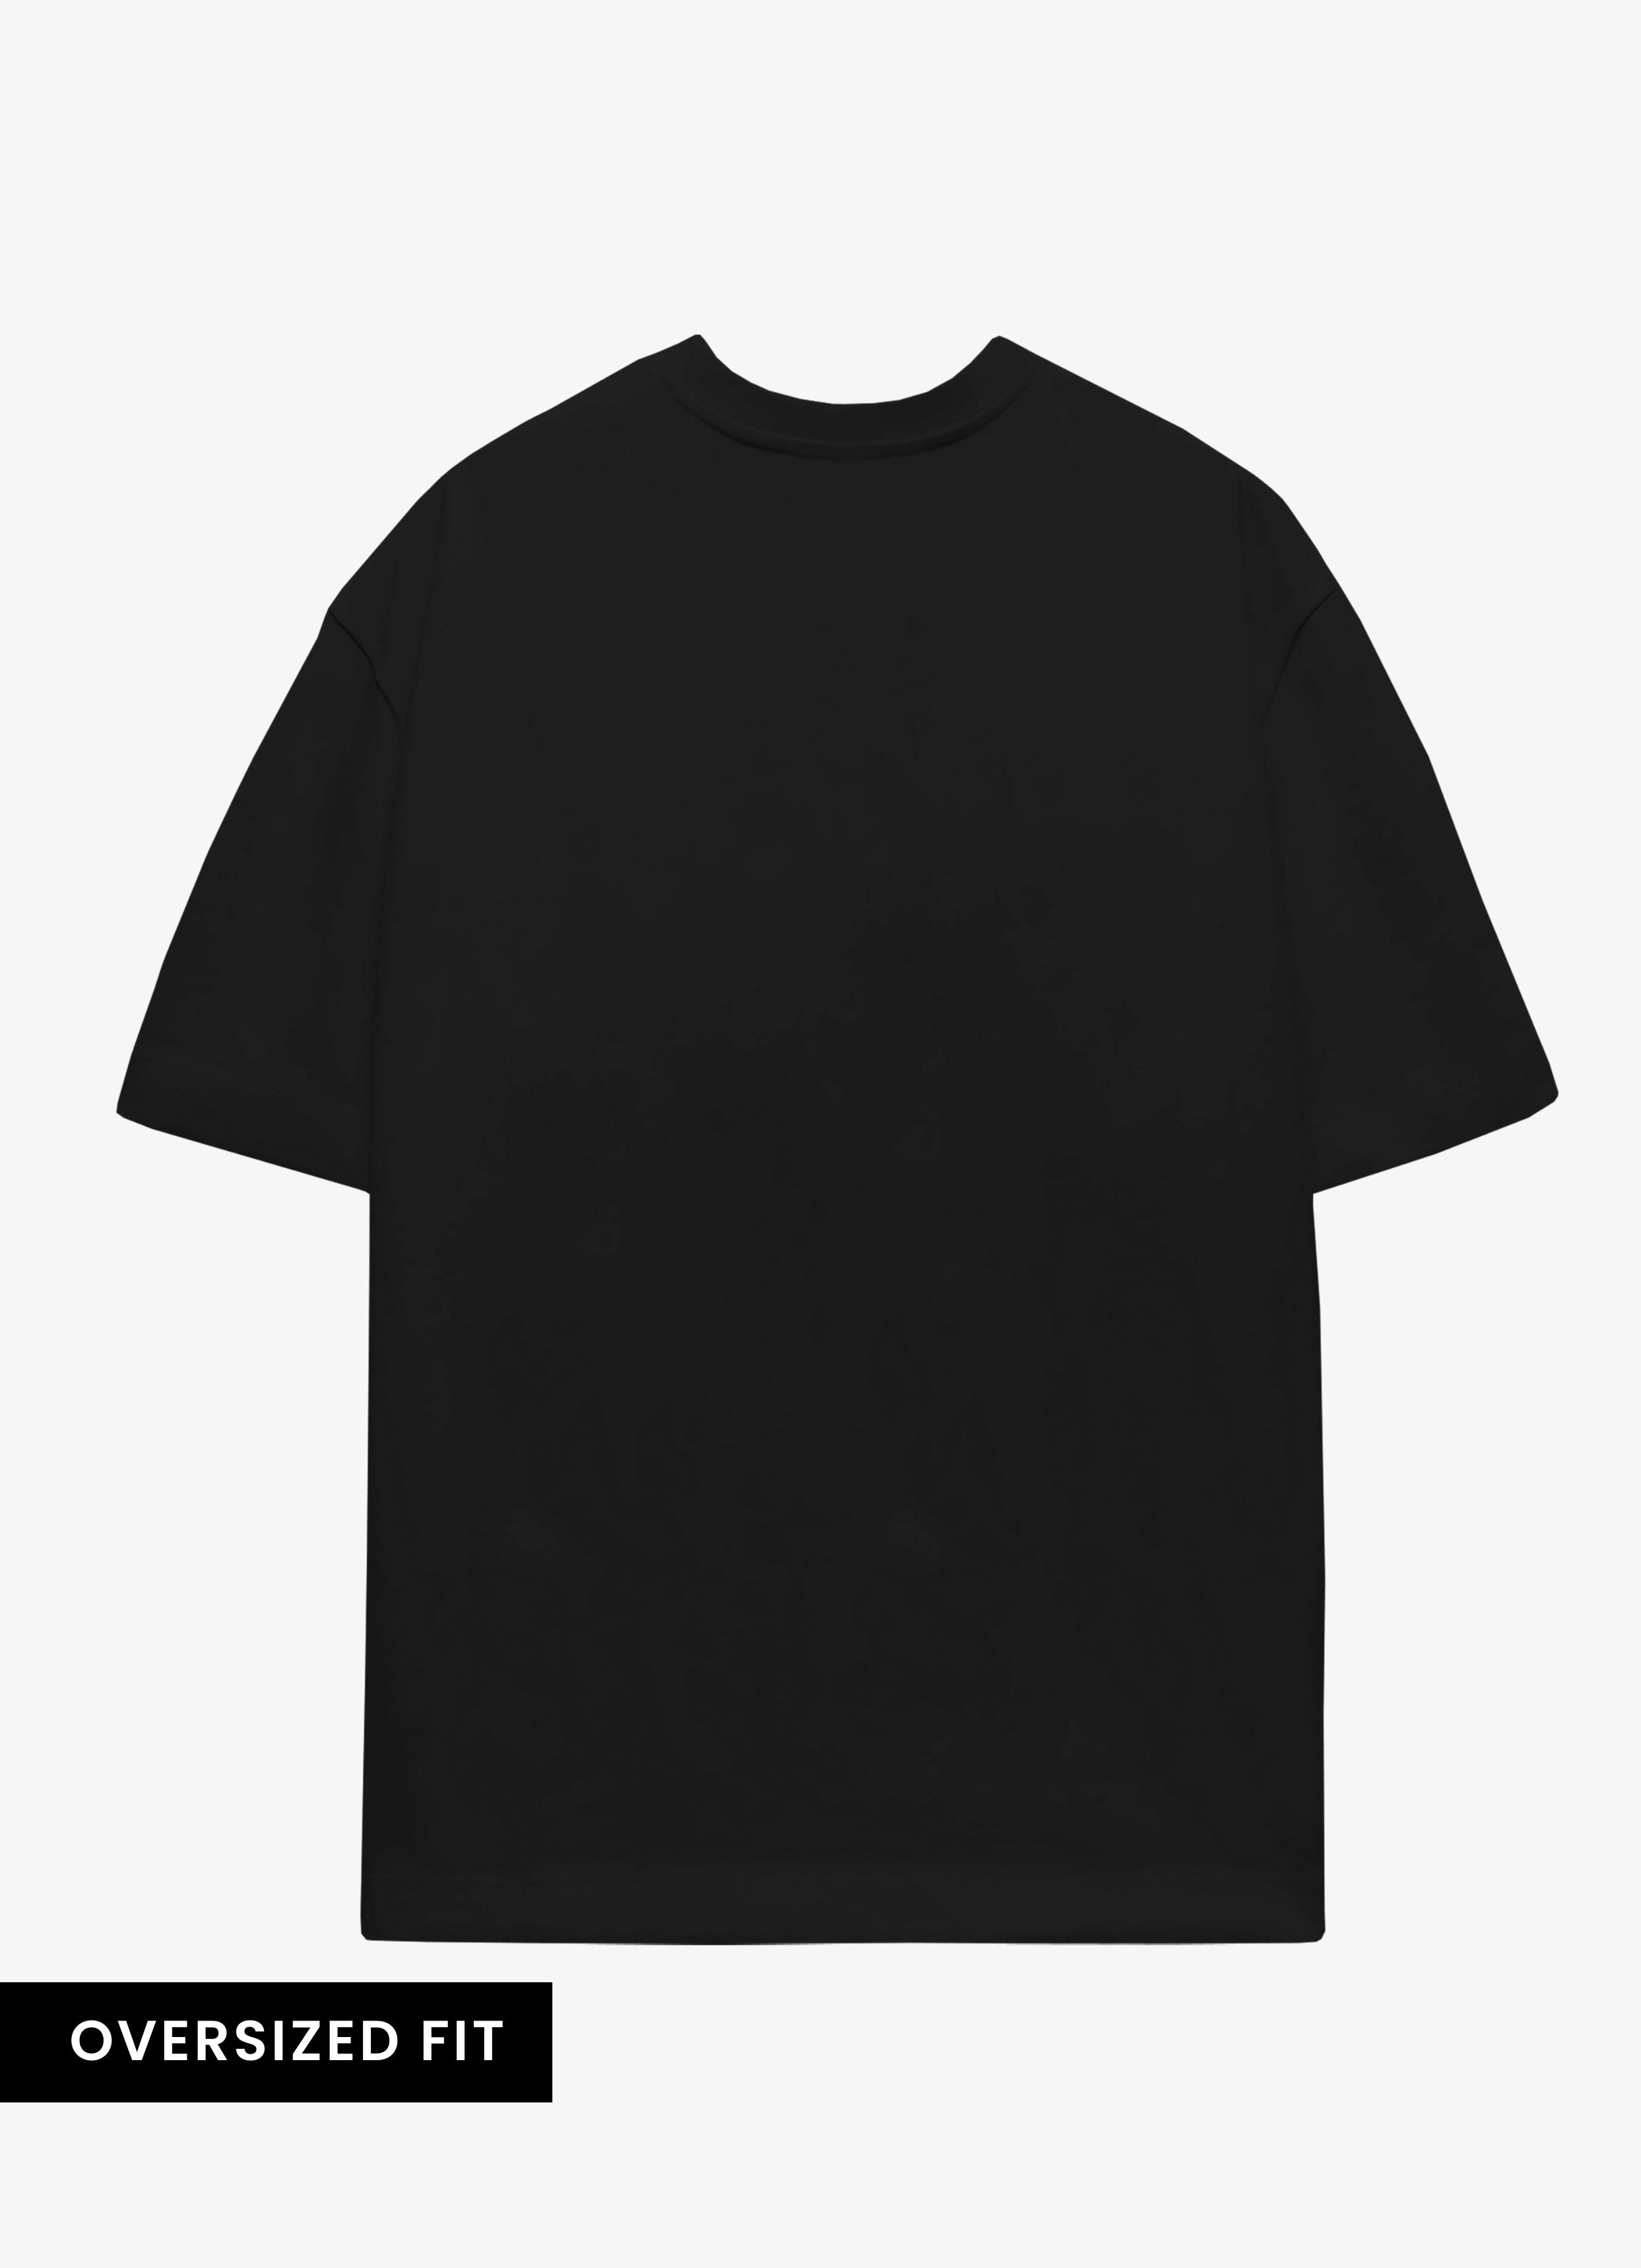 The Weeknd Front Oversized  Tshirt